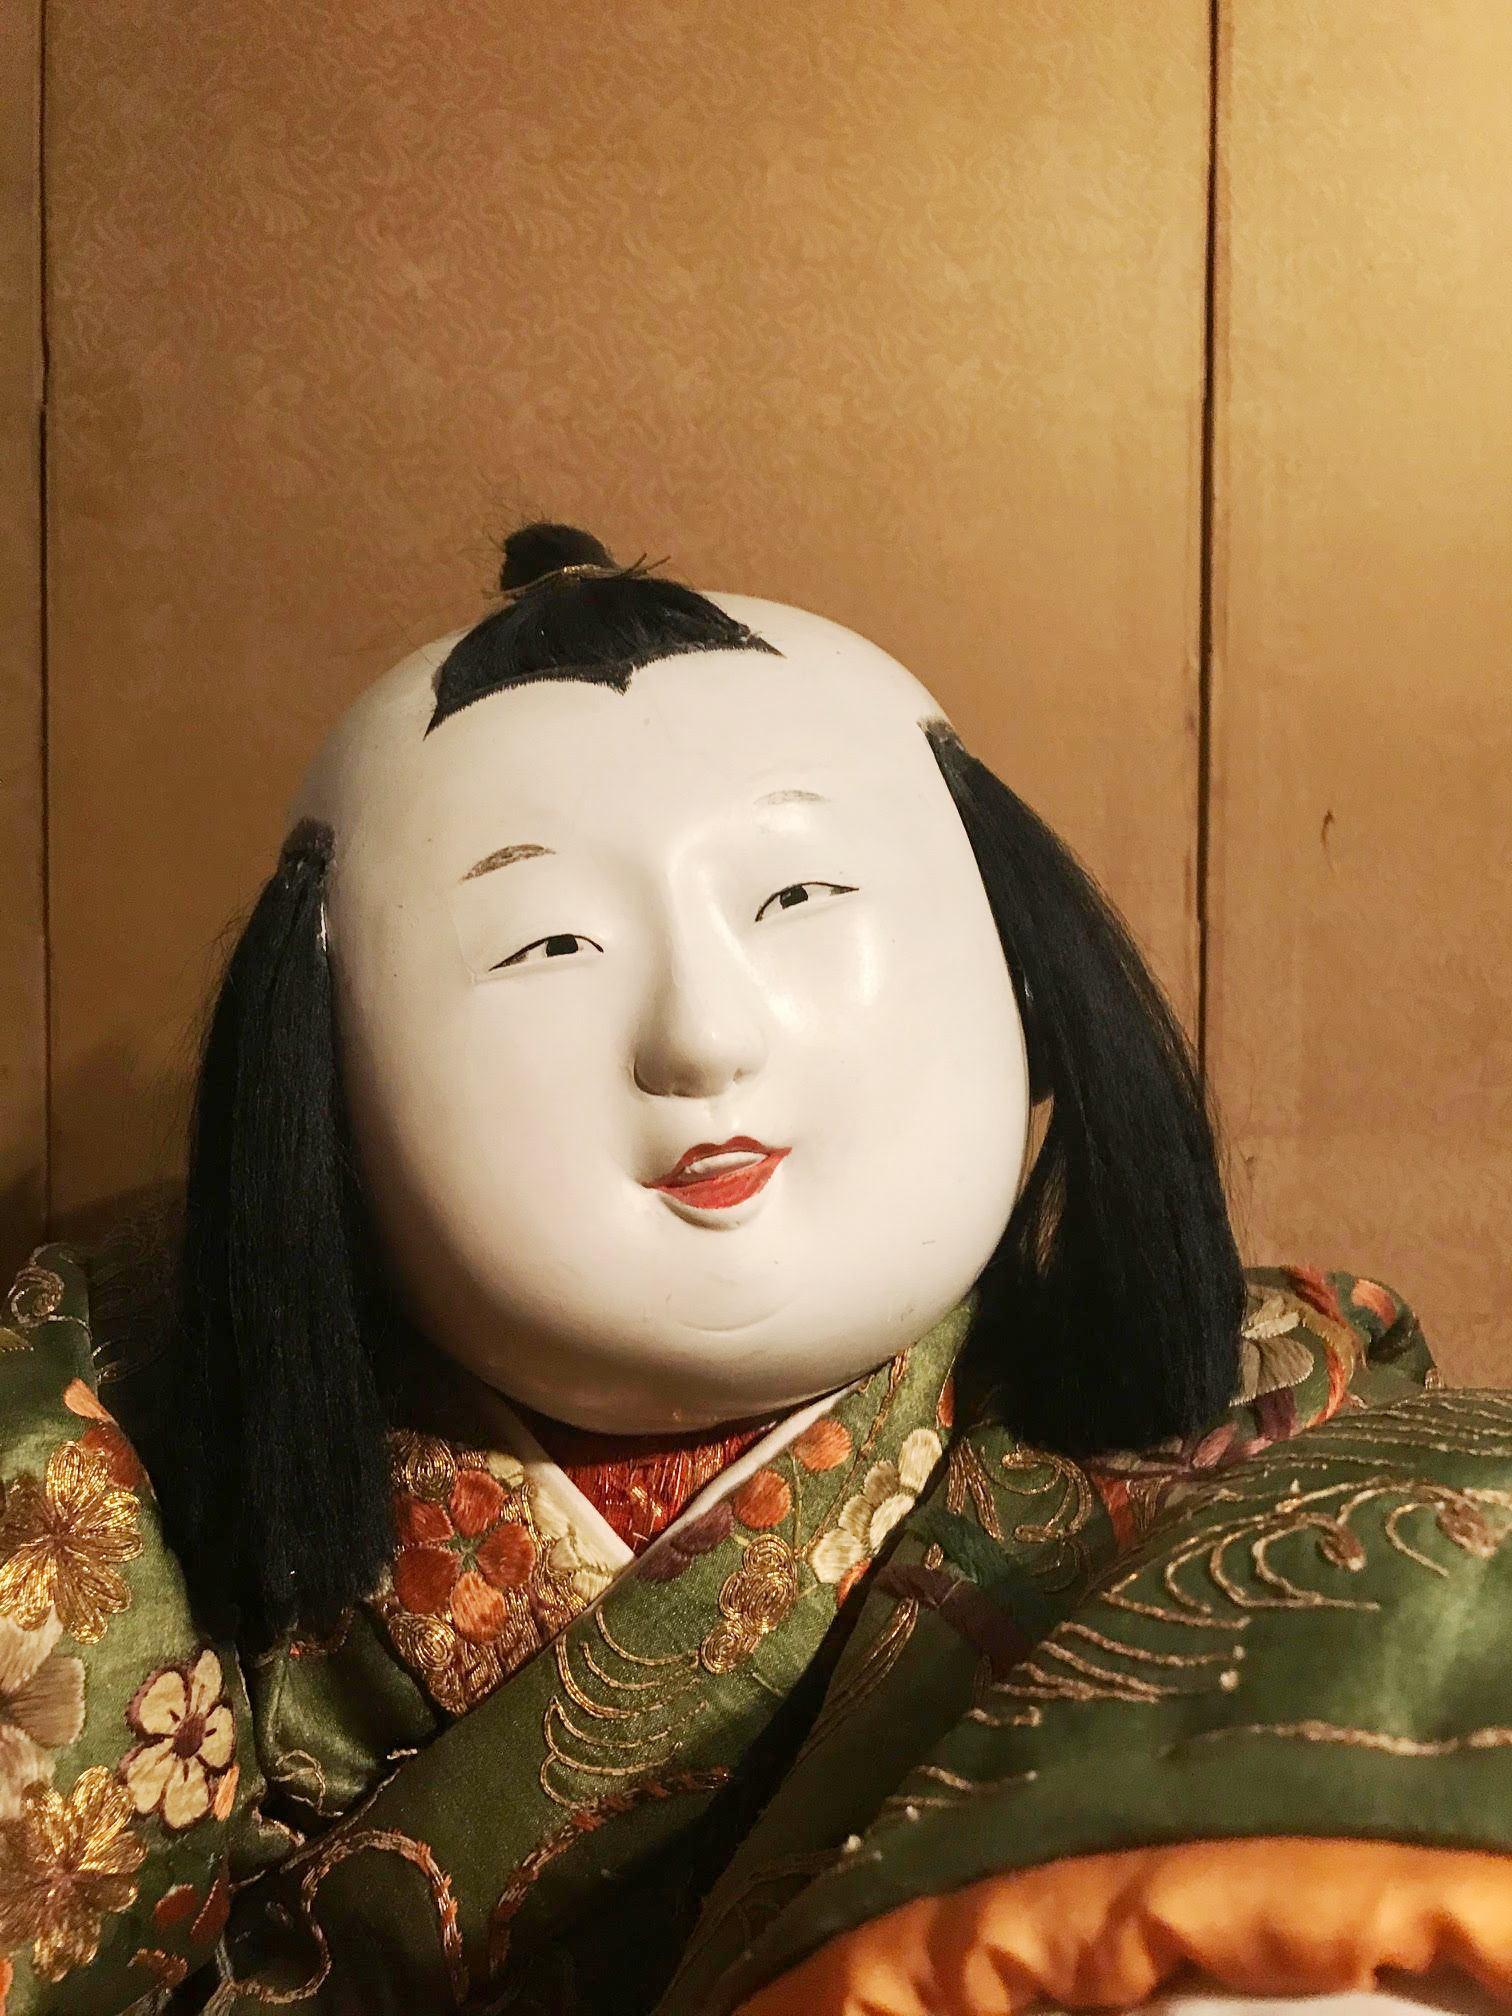 Japanese rare late Edo period large Imperial Gosho Ningyo doll. The piece depicts a cute chubby child with very white skin, small limbs and big head with a bright expression and playful posture.
Gosho ningyo dolls were given as gifts within the